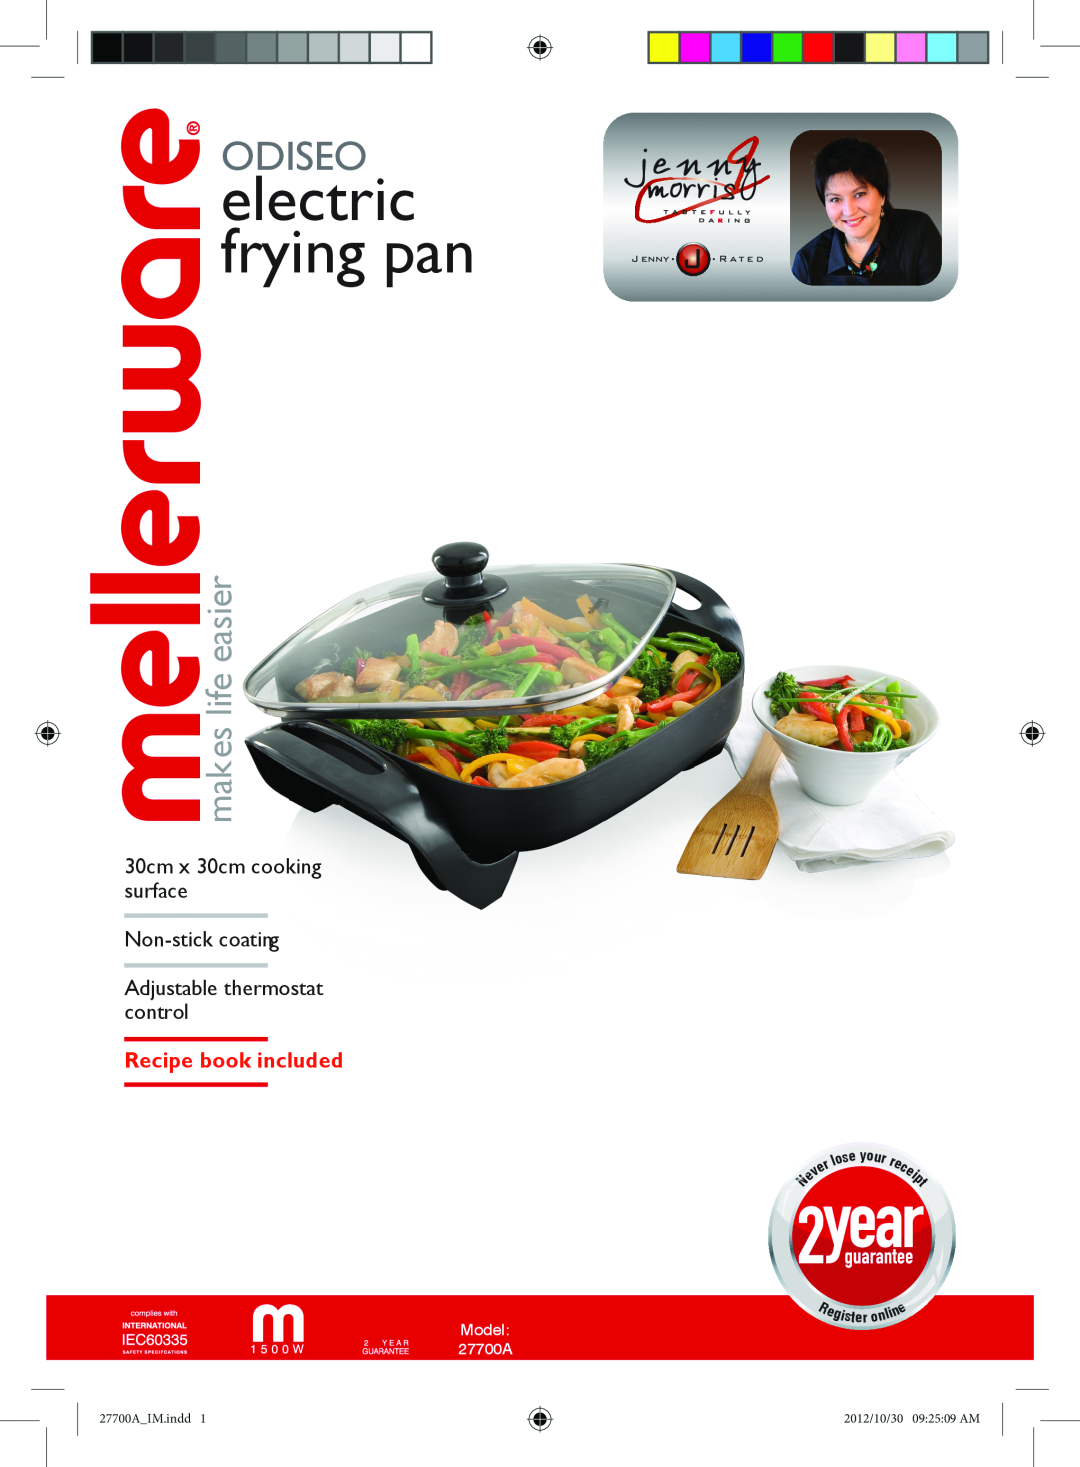 Mellerware 27700A manual electric frying pan, Odiseo, makes life easier, 30cm x 30cm cooking surface Non-stick coating 